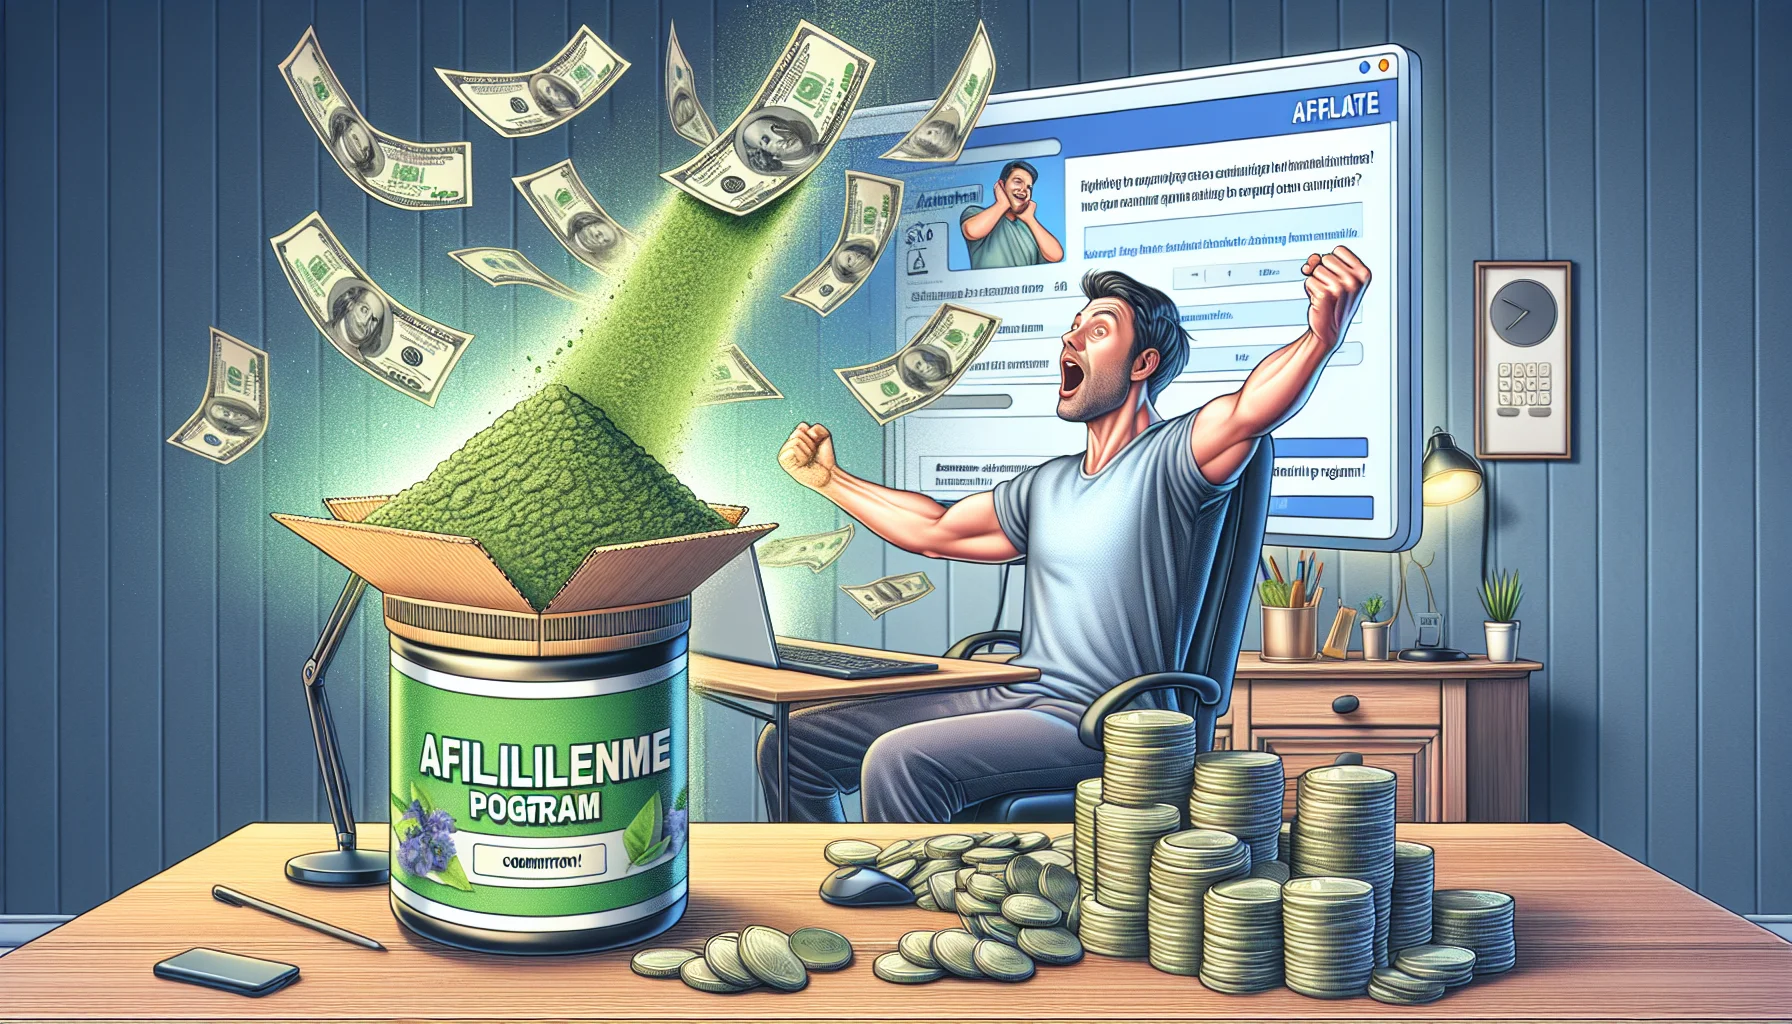 A humorous and realistic illustration symbolizing an affiliate program for a brand promoting healthy lifestyle and natural supplements. The scenario unfolds in a digital setting related to online monetization. Explore the scene where an enthusiastic Caucasian male in his 30s, wearing comfortable home office attire, is seen exuding excitement over his computer screen displaying a sizable increase in commission. To his side, a pack of the company's green powders placed neatly. Glimmering coins and dollar notes are emerging from the screen, suggesting the lucrative possibilities of the affiliate program. Weave in a light touch of surrealism to emphasize the rewarding potential of the program.